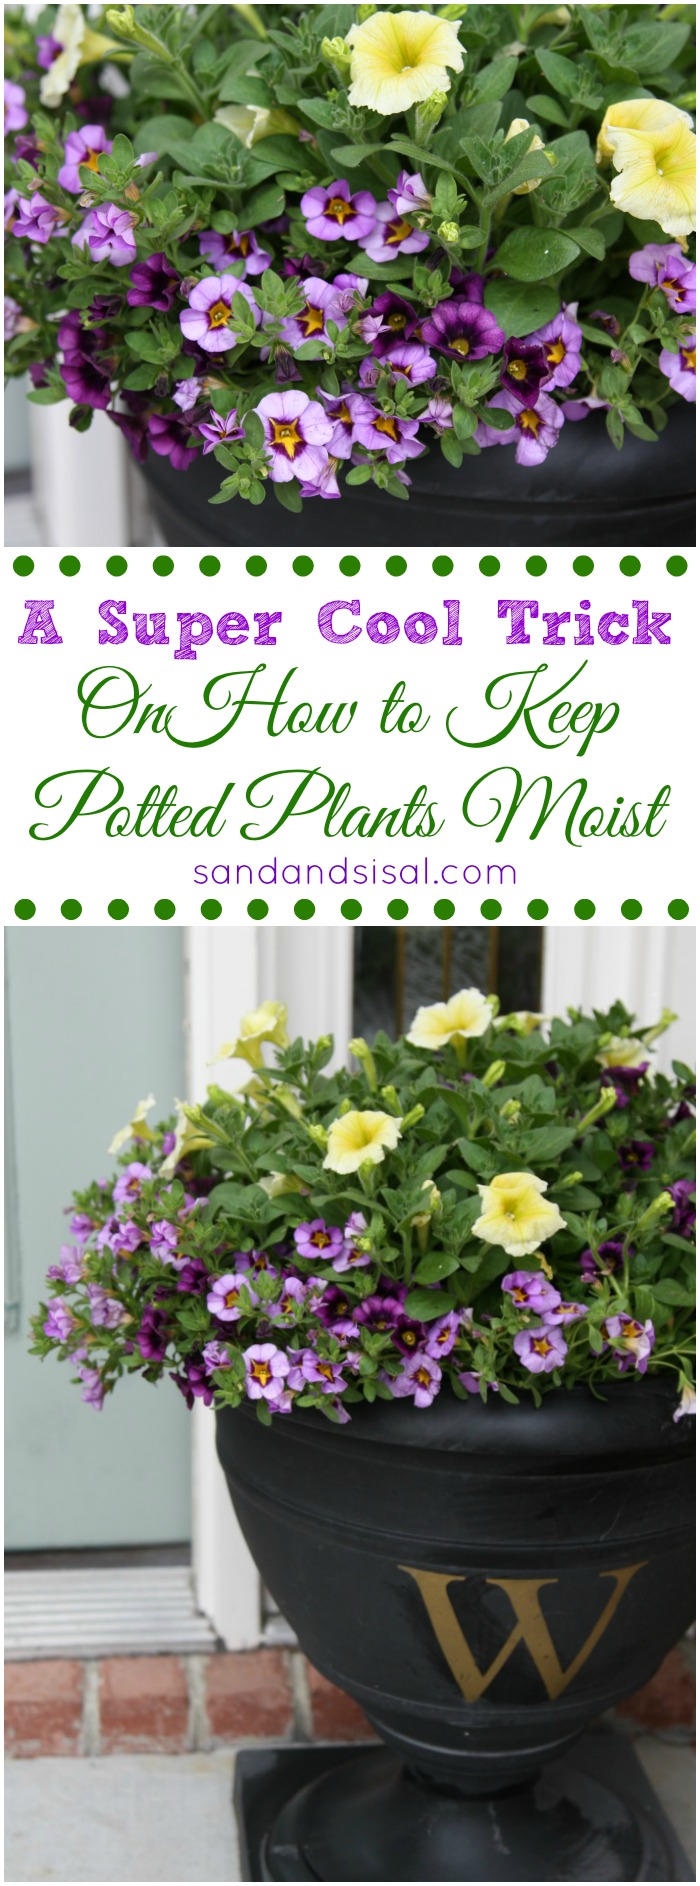 A Super Cool Trick on How to Keep Potted Plants Moist Longer